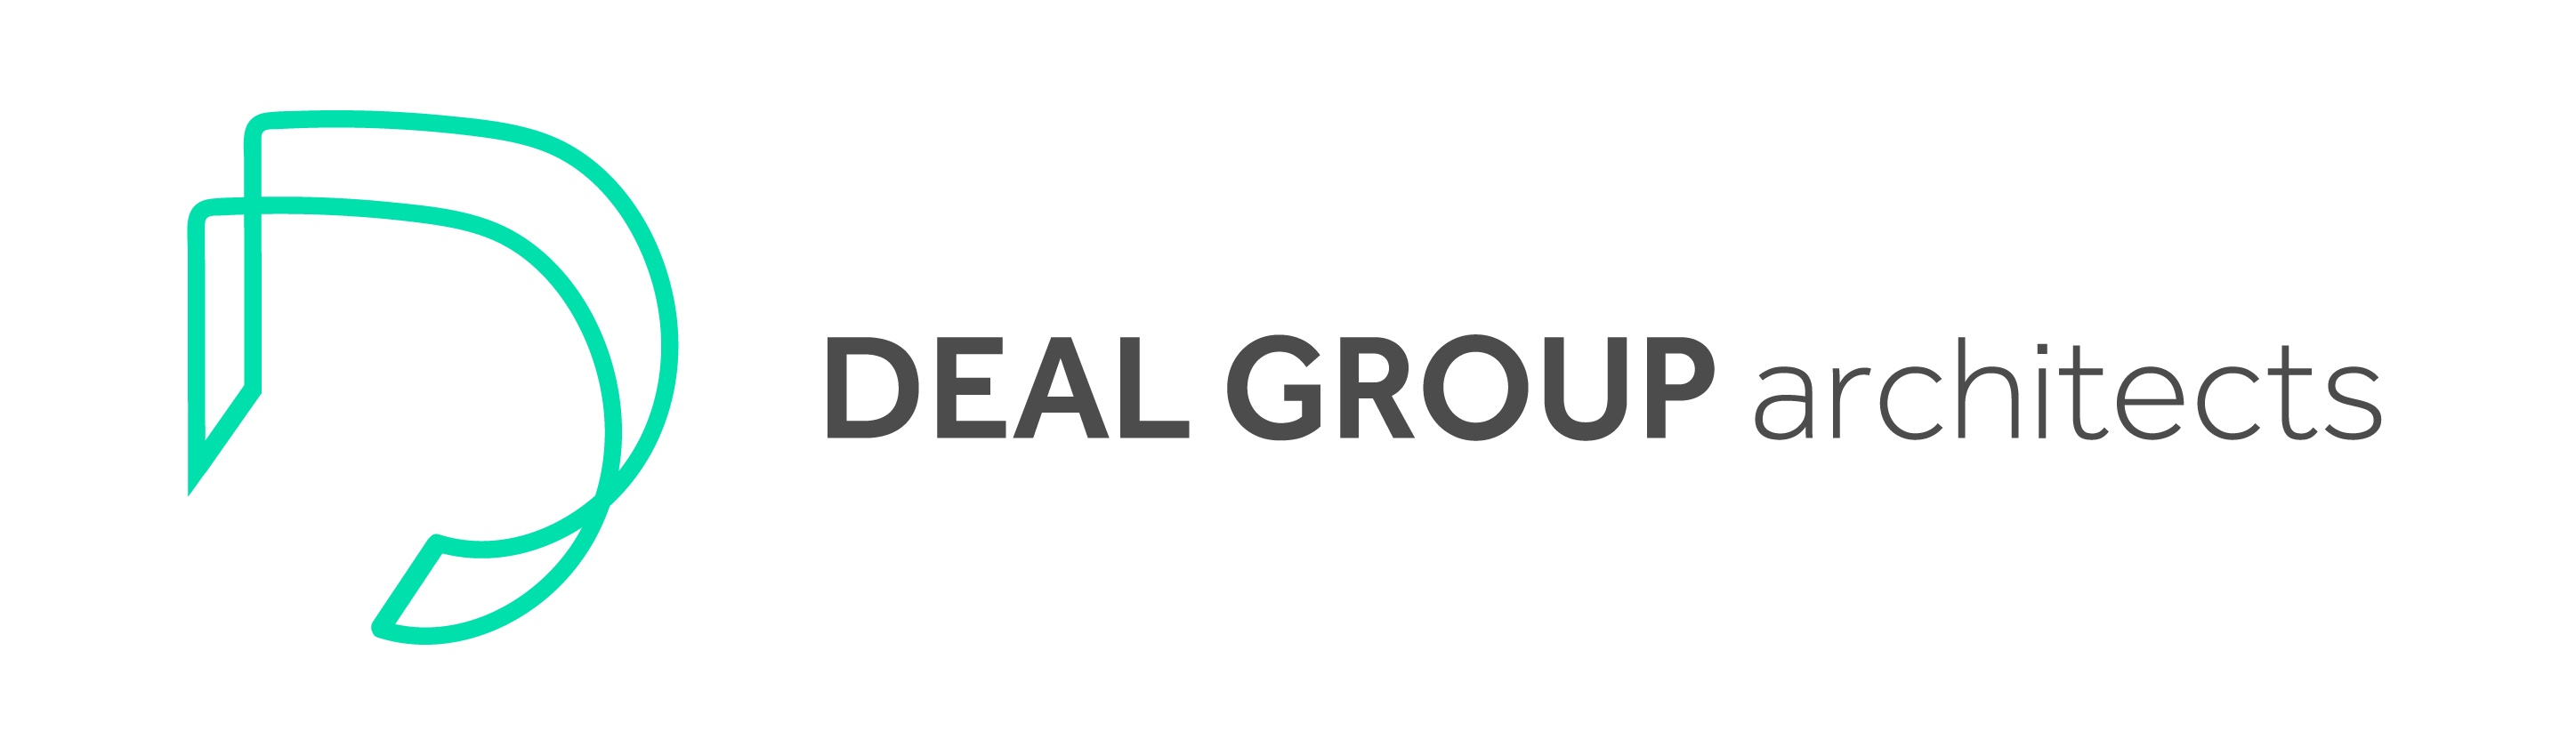 Dealgroup